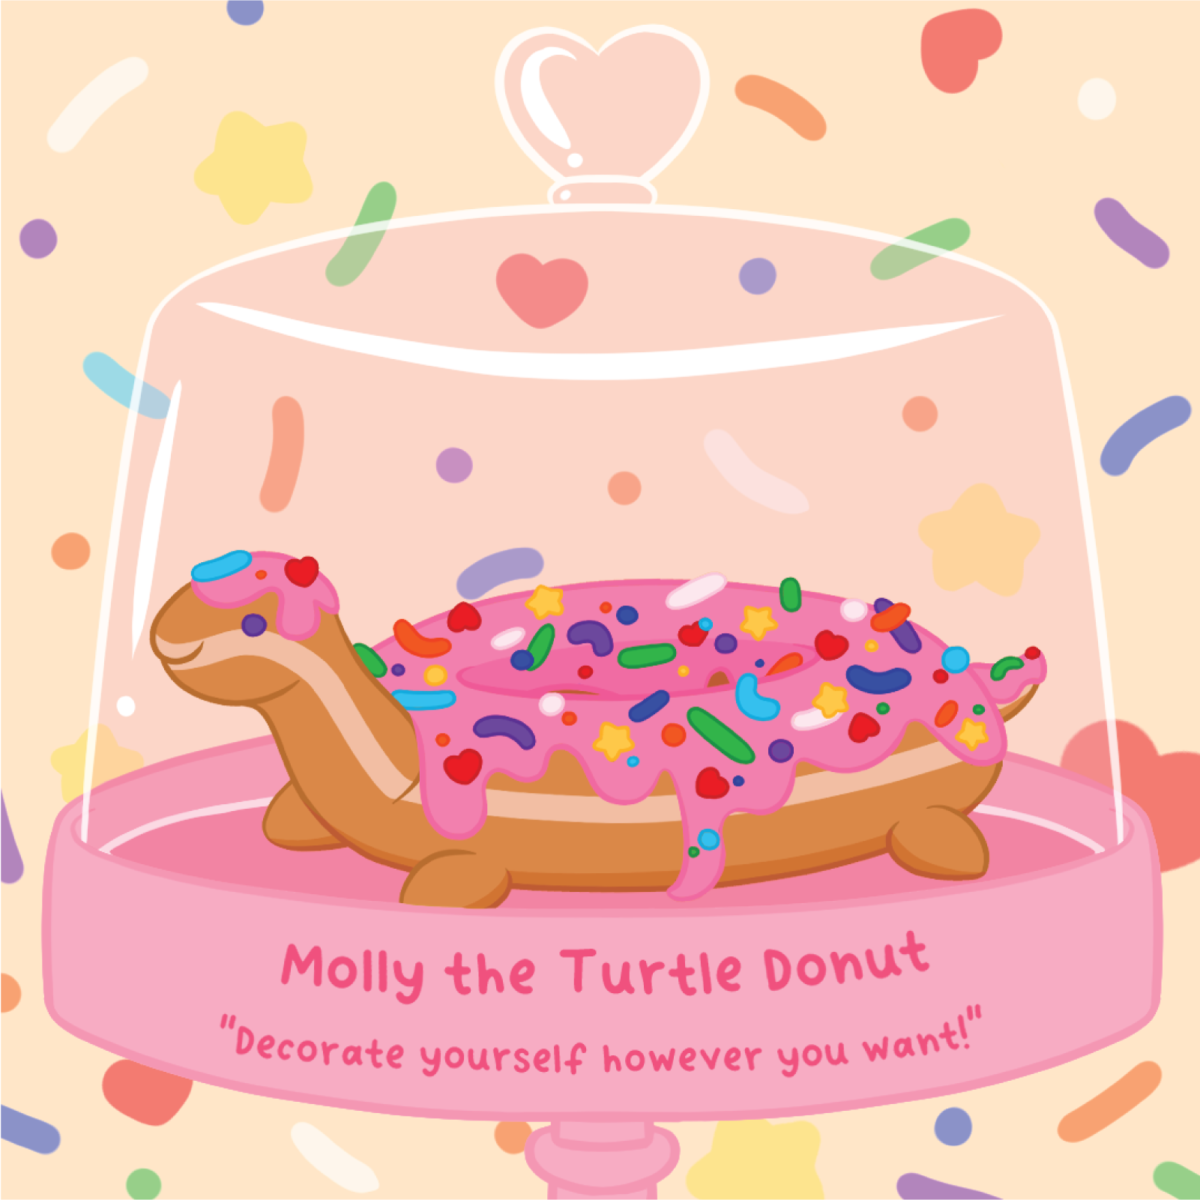 Molly the Donut Turtle